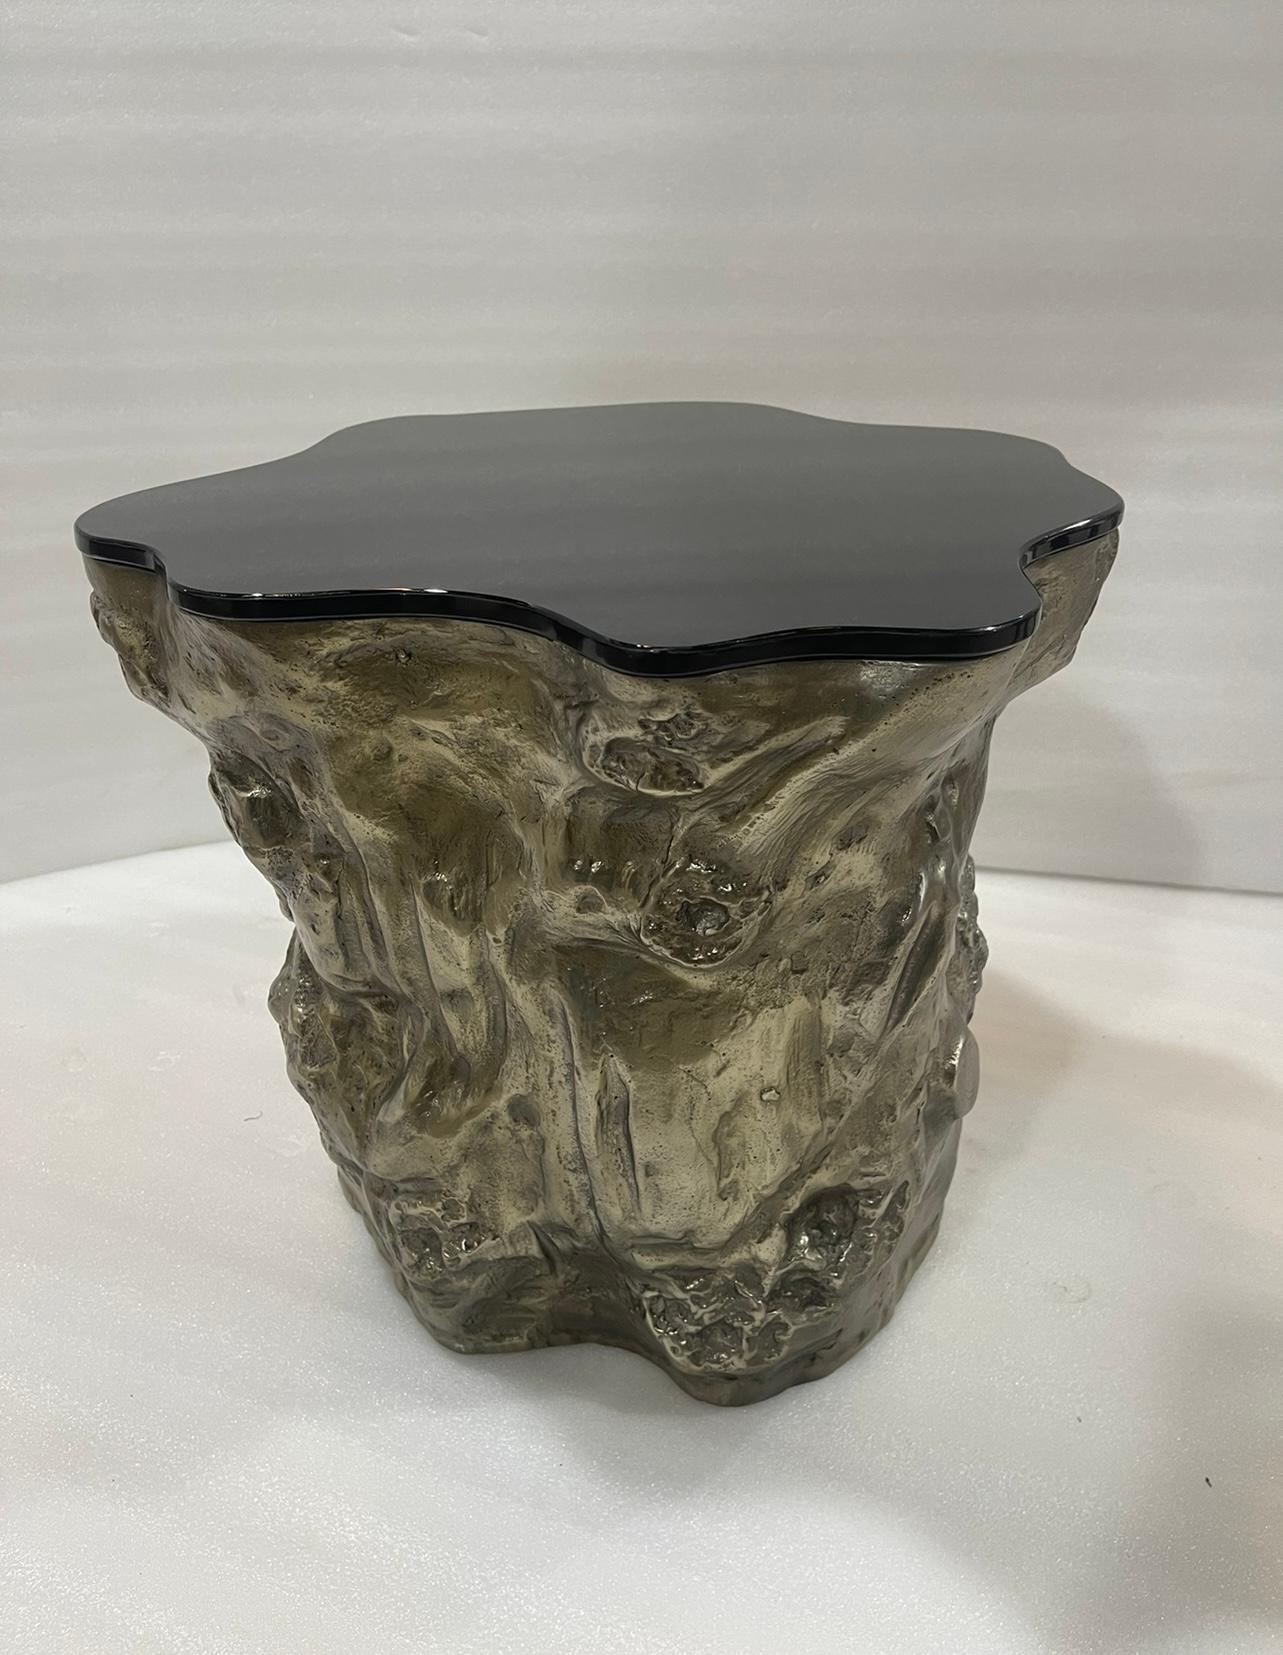 The Strom series is a nature inspired furniture design with more than an organically sculpted form to present. The base illustrates a charismatic part of a tree trunk in molten patinated brass finish and the fine metallic glass top brings a